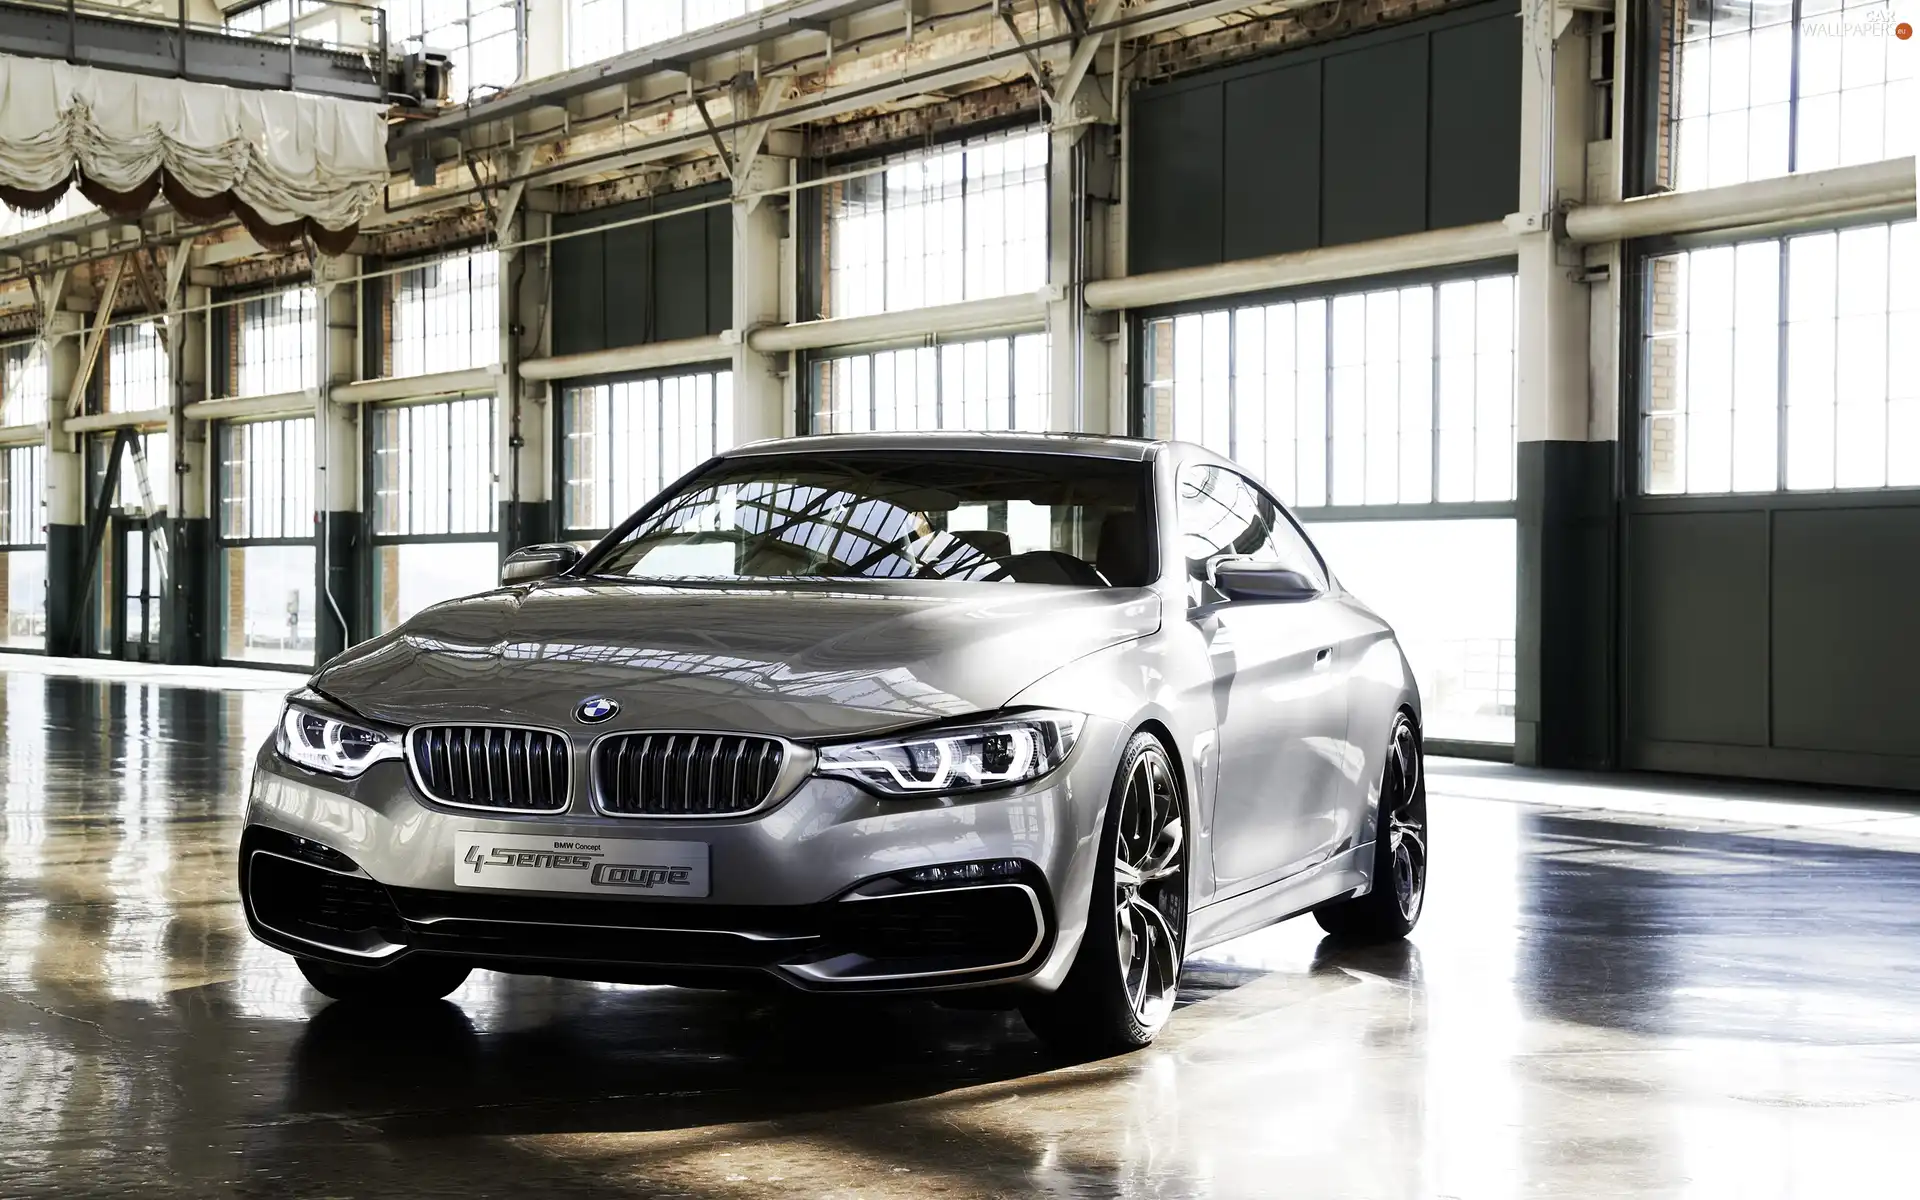 Concept, Front Series 4, 4 Series, 2013, BMW